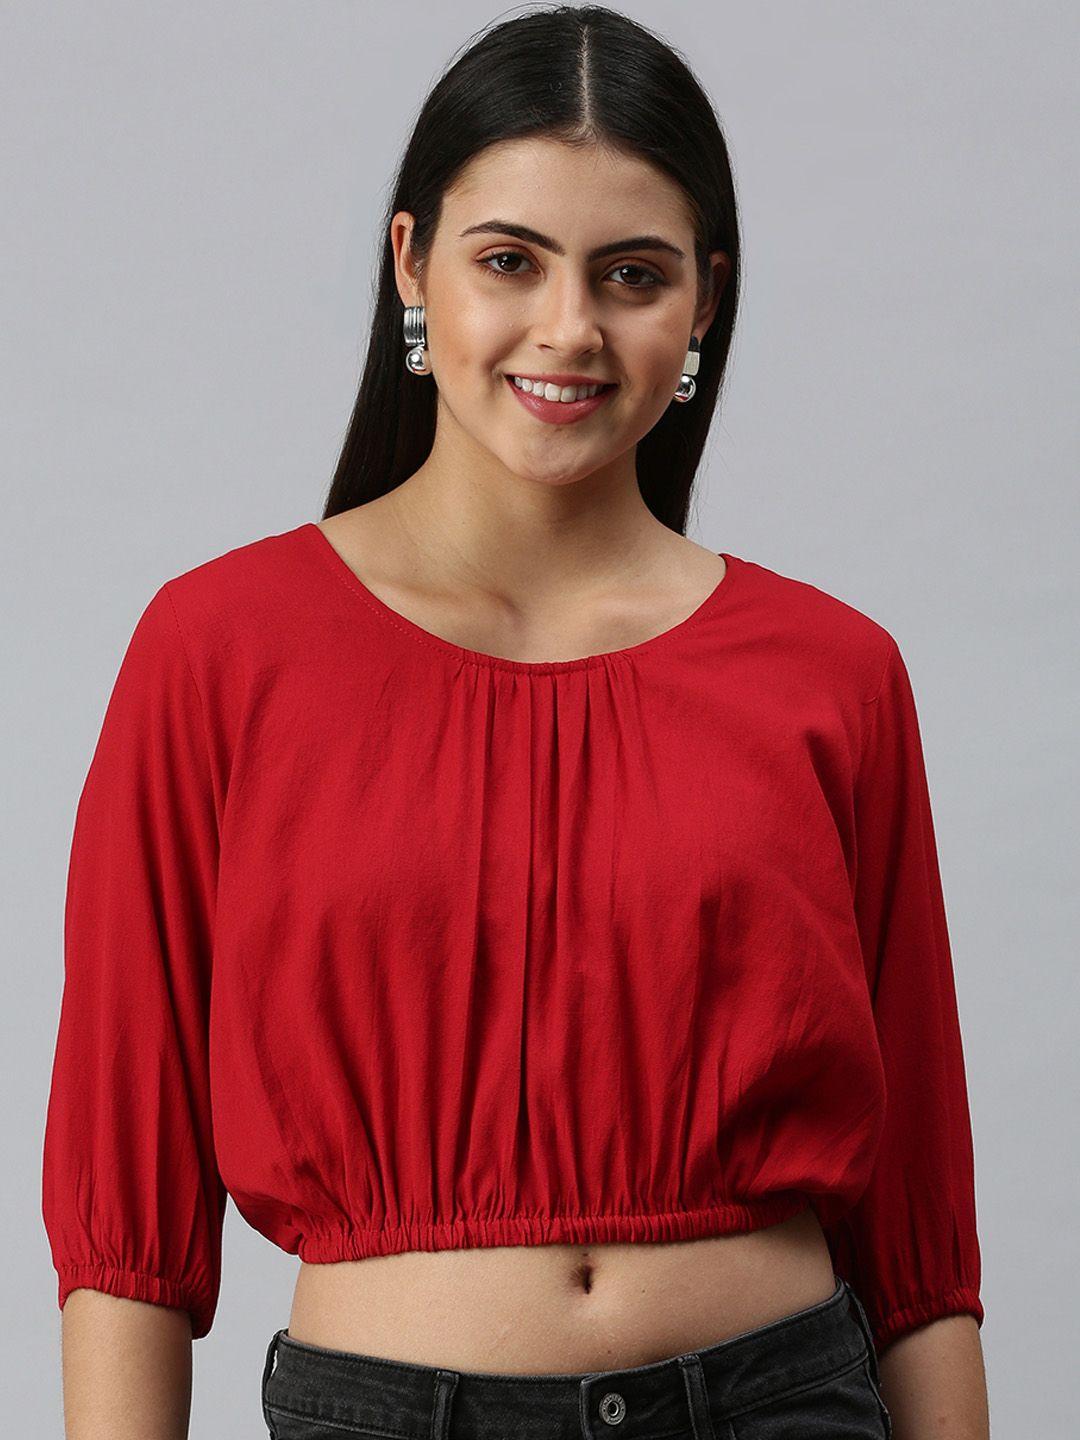 showoff women red styled back crop top